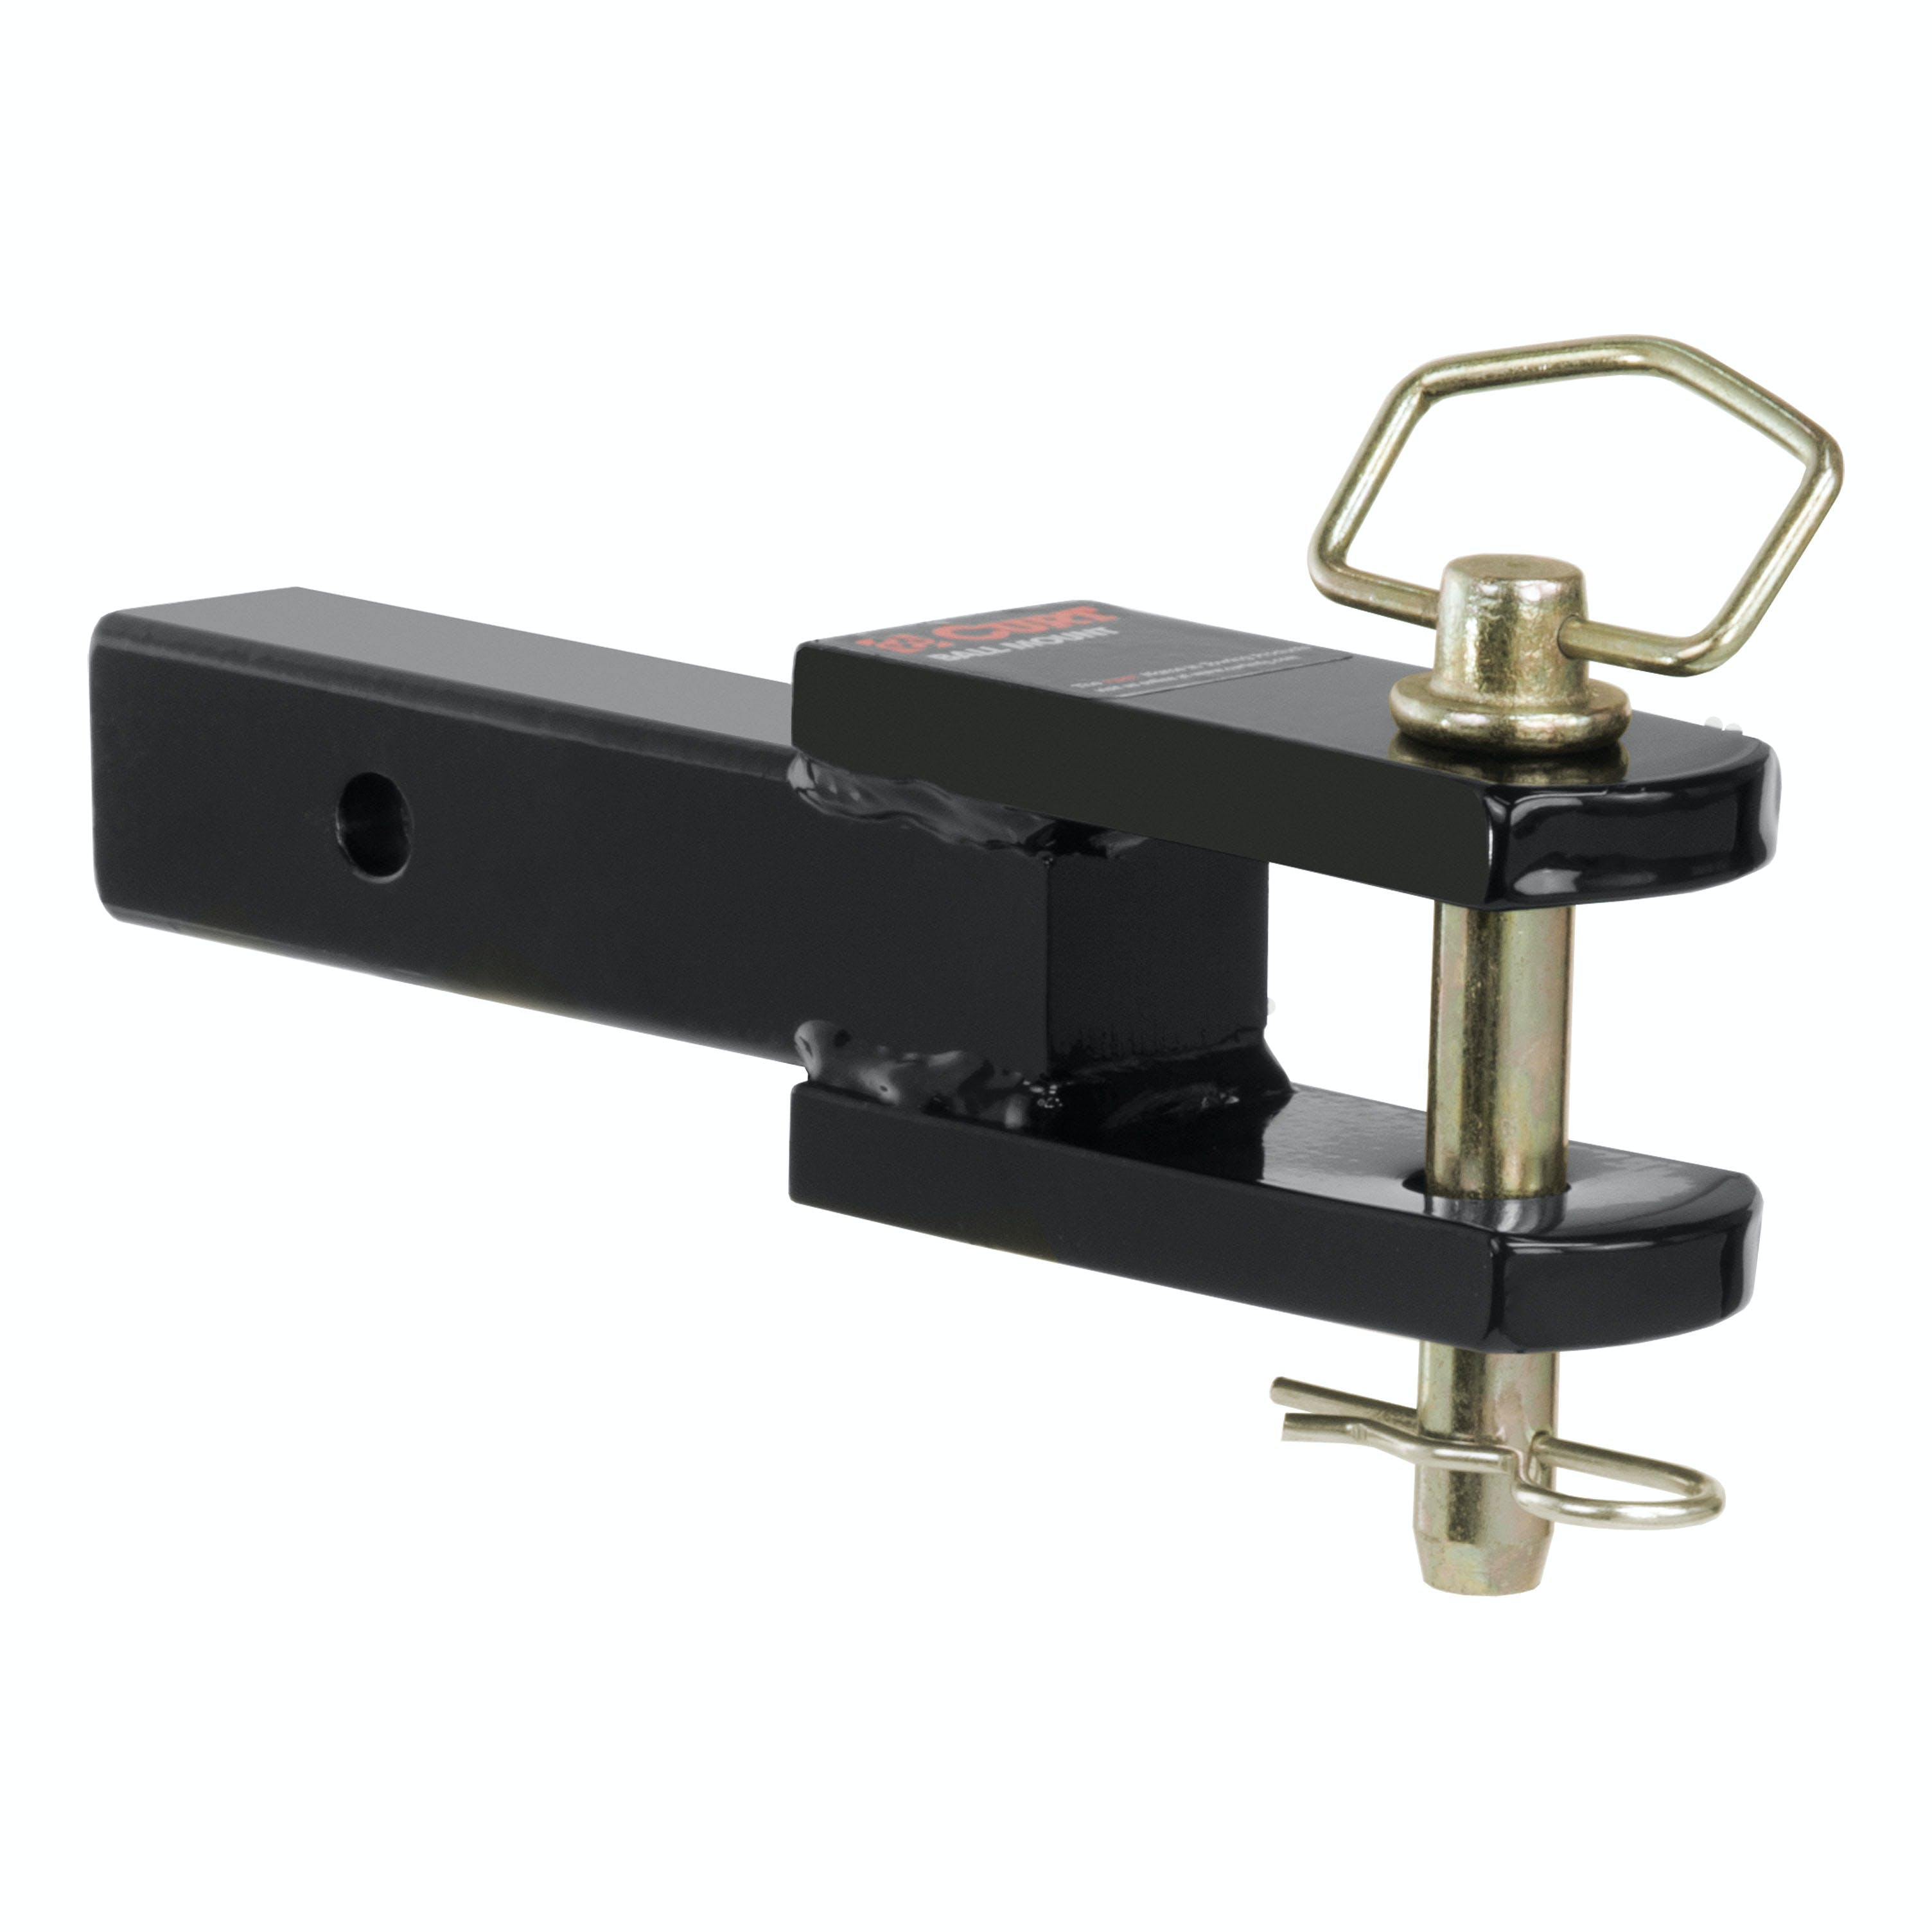 CURT 45821 Clevis Pin Ball Mount with 1 Diameter Pin (2 Shank, 6,000 lbs.)